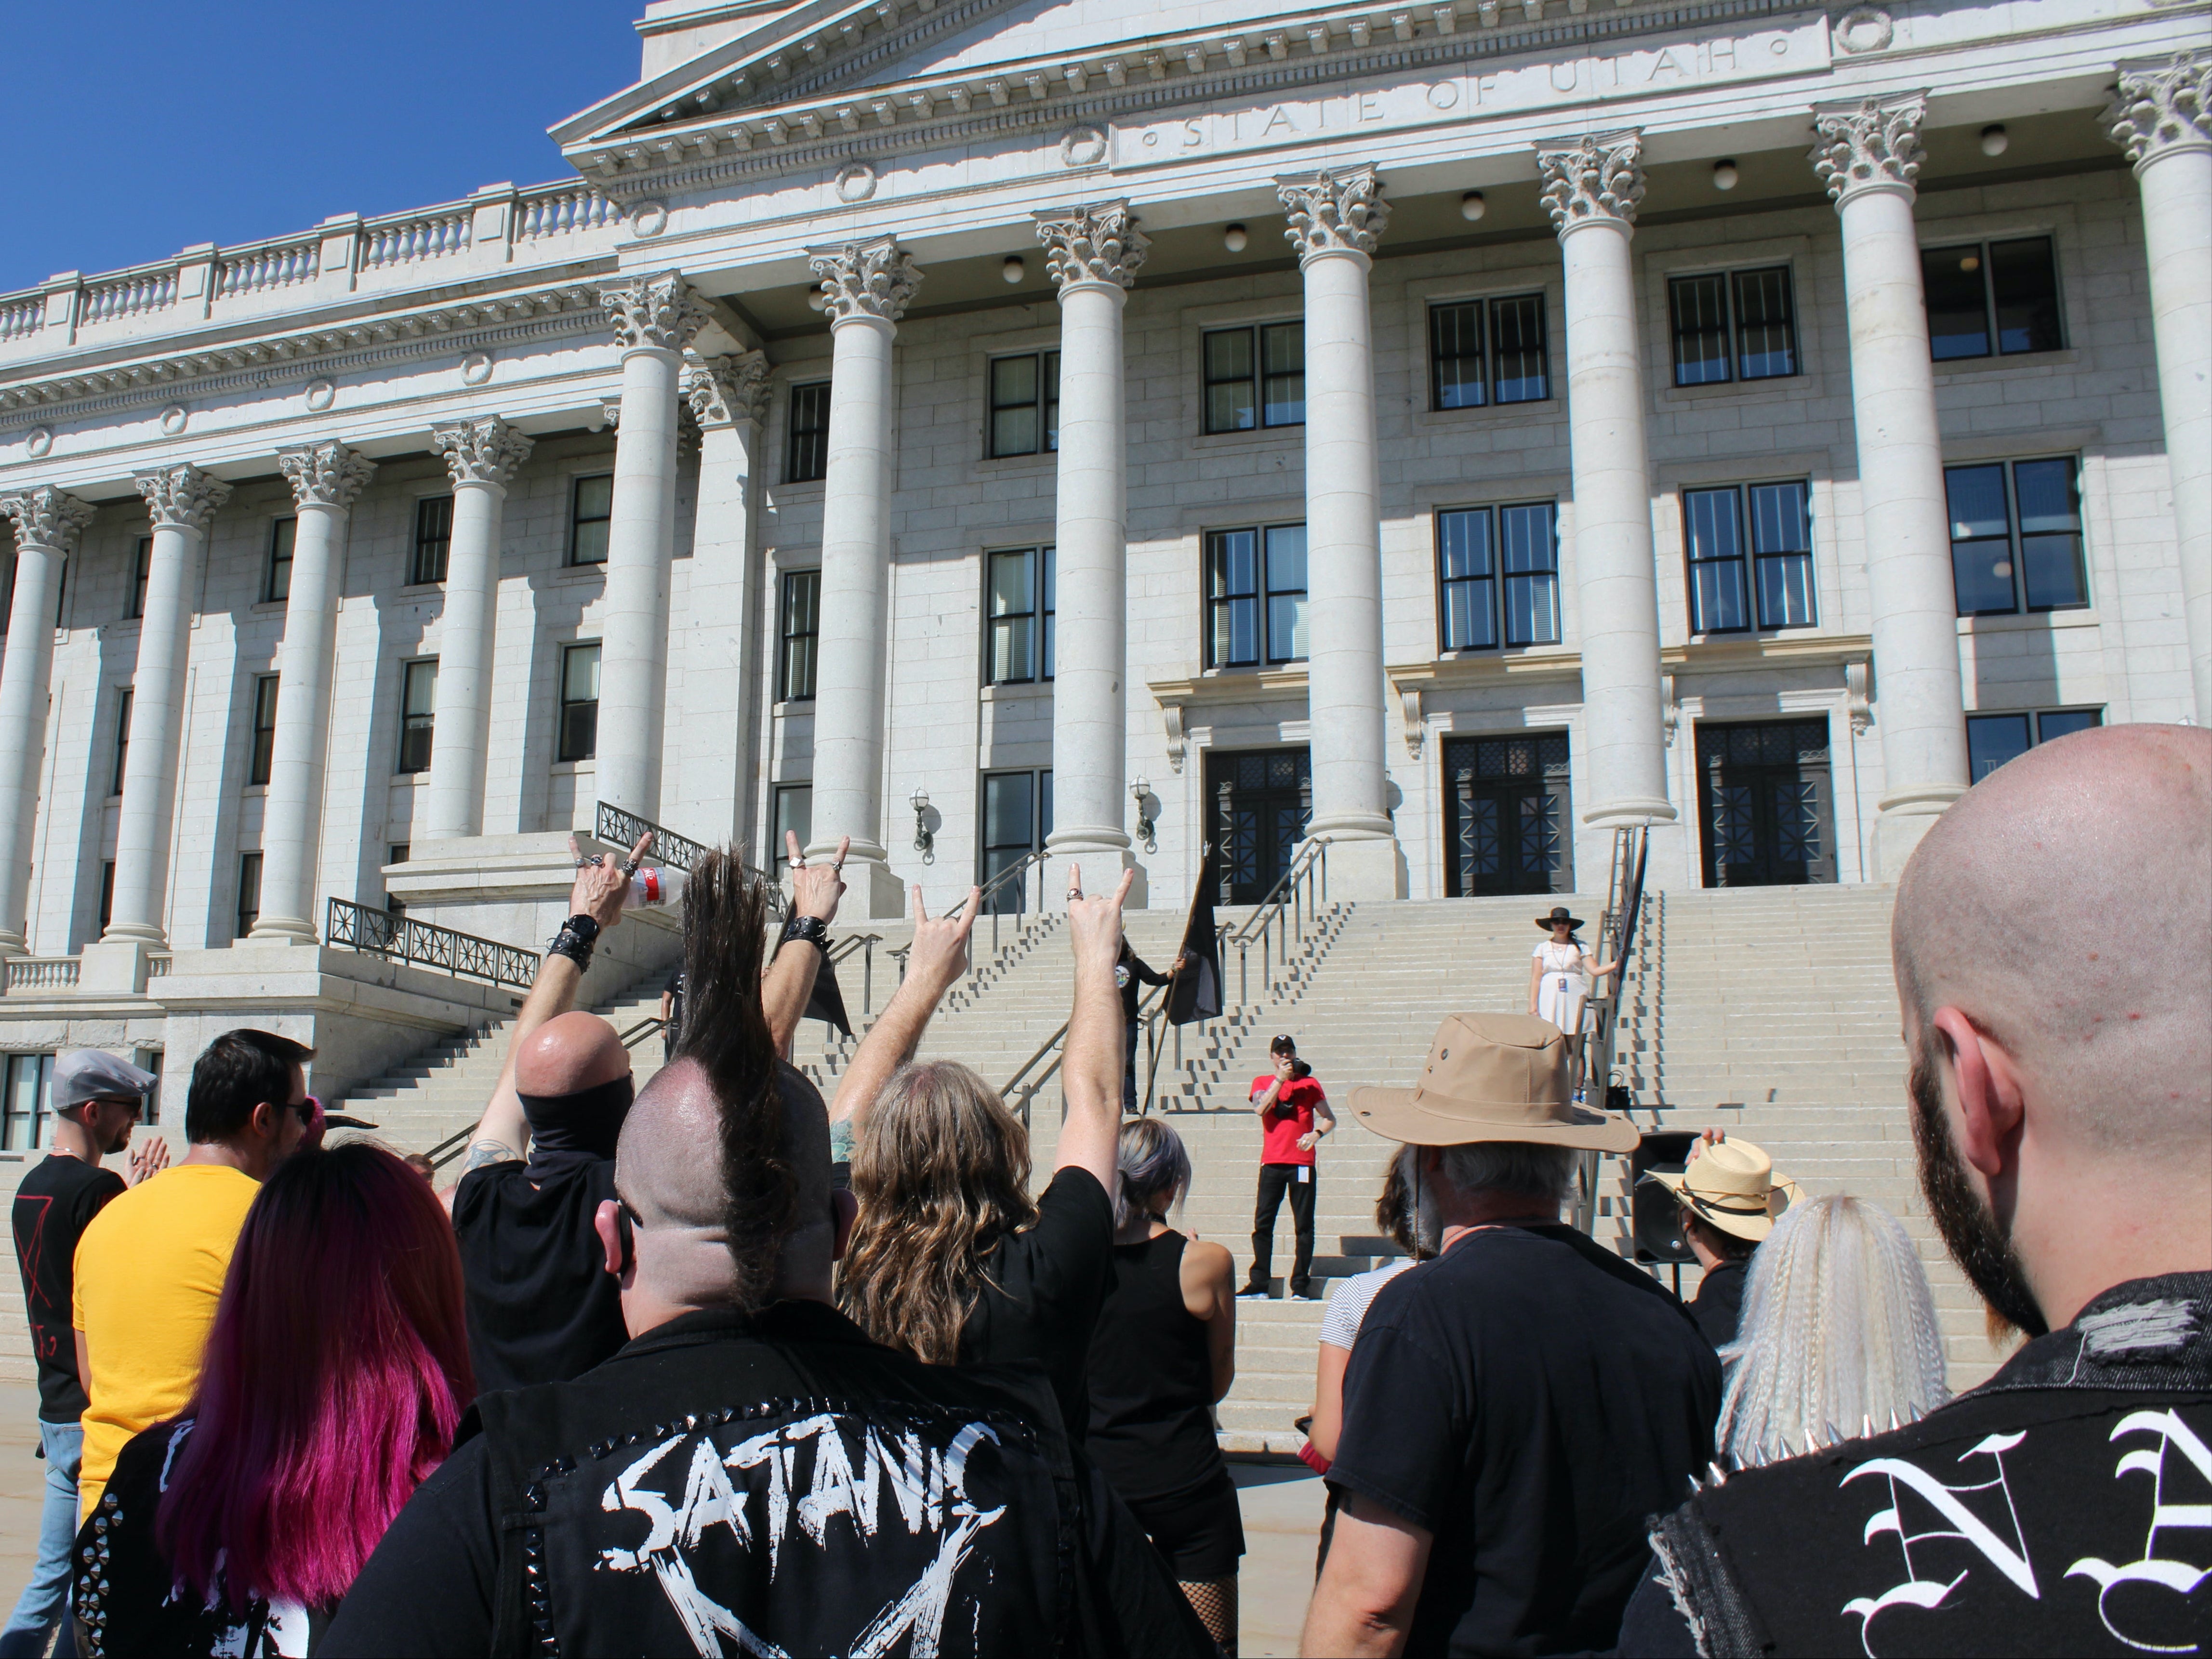 Supporters of a religious reproductive rights rally organized by the Satanic Temple join in a “Hail Satan!” chant outside the Utah Capitol on Saturday, Sept. 25